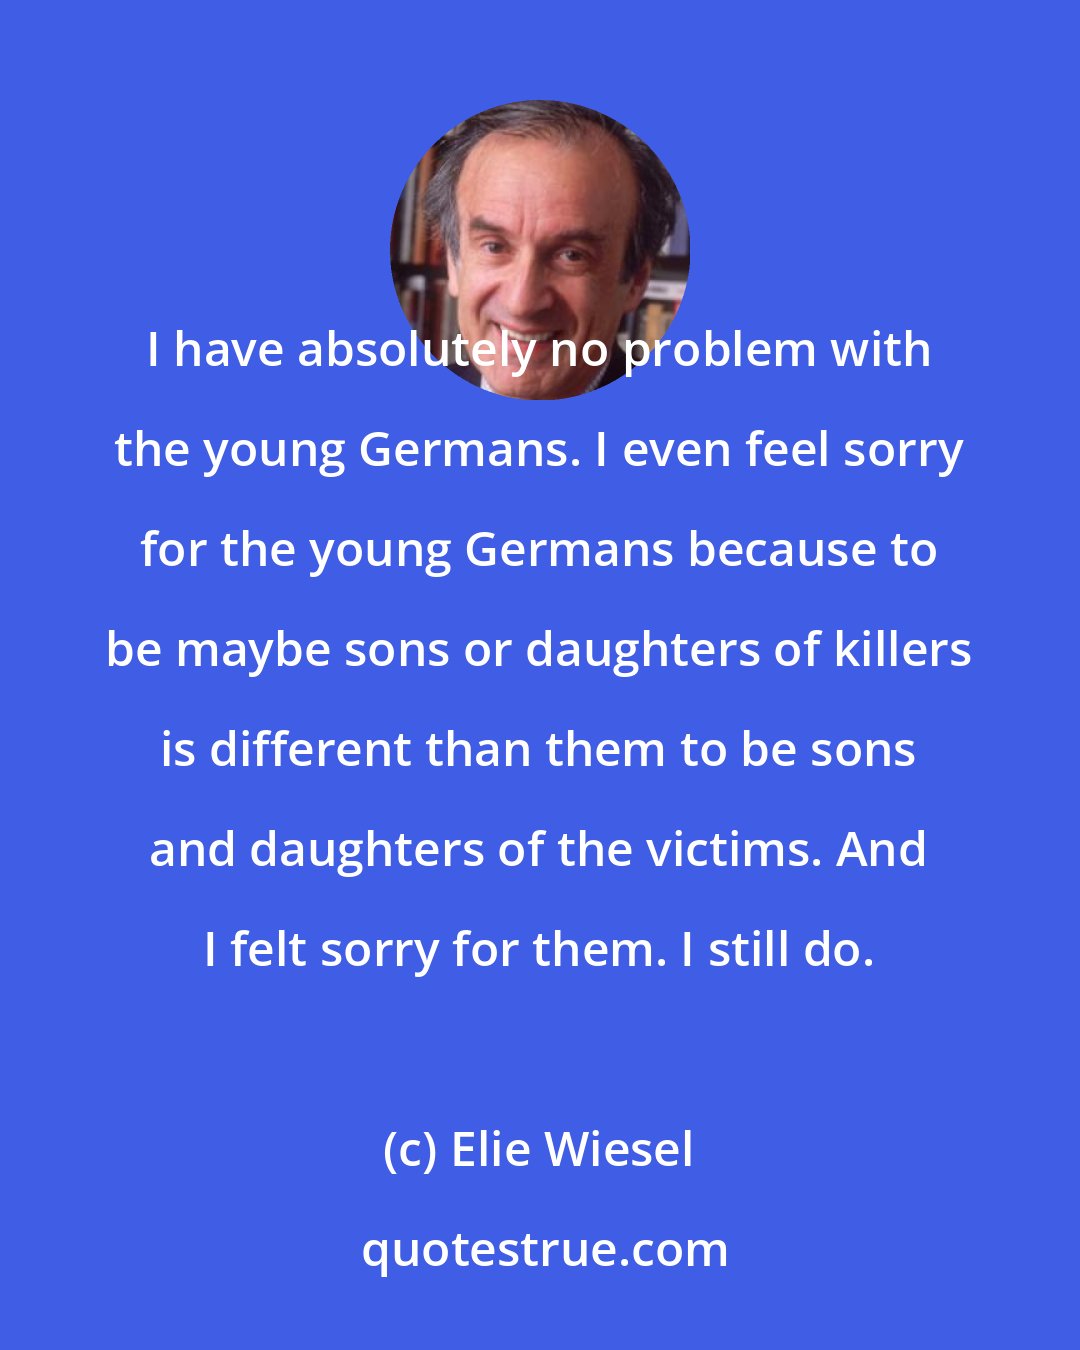 Elie Wiesel: I have absolutely no problem with the young Germans. I even feel sorry for the young Germans because to be maybe sons or daughters of killers is different than them to be sons and daughters of the victims. And I felt sorry for them. I still do.